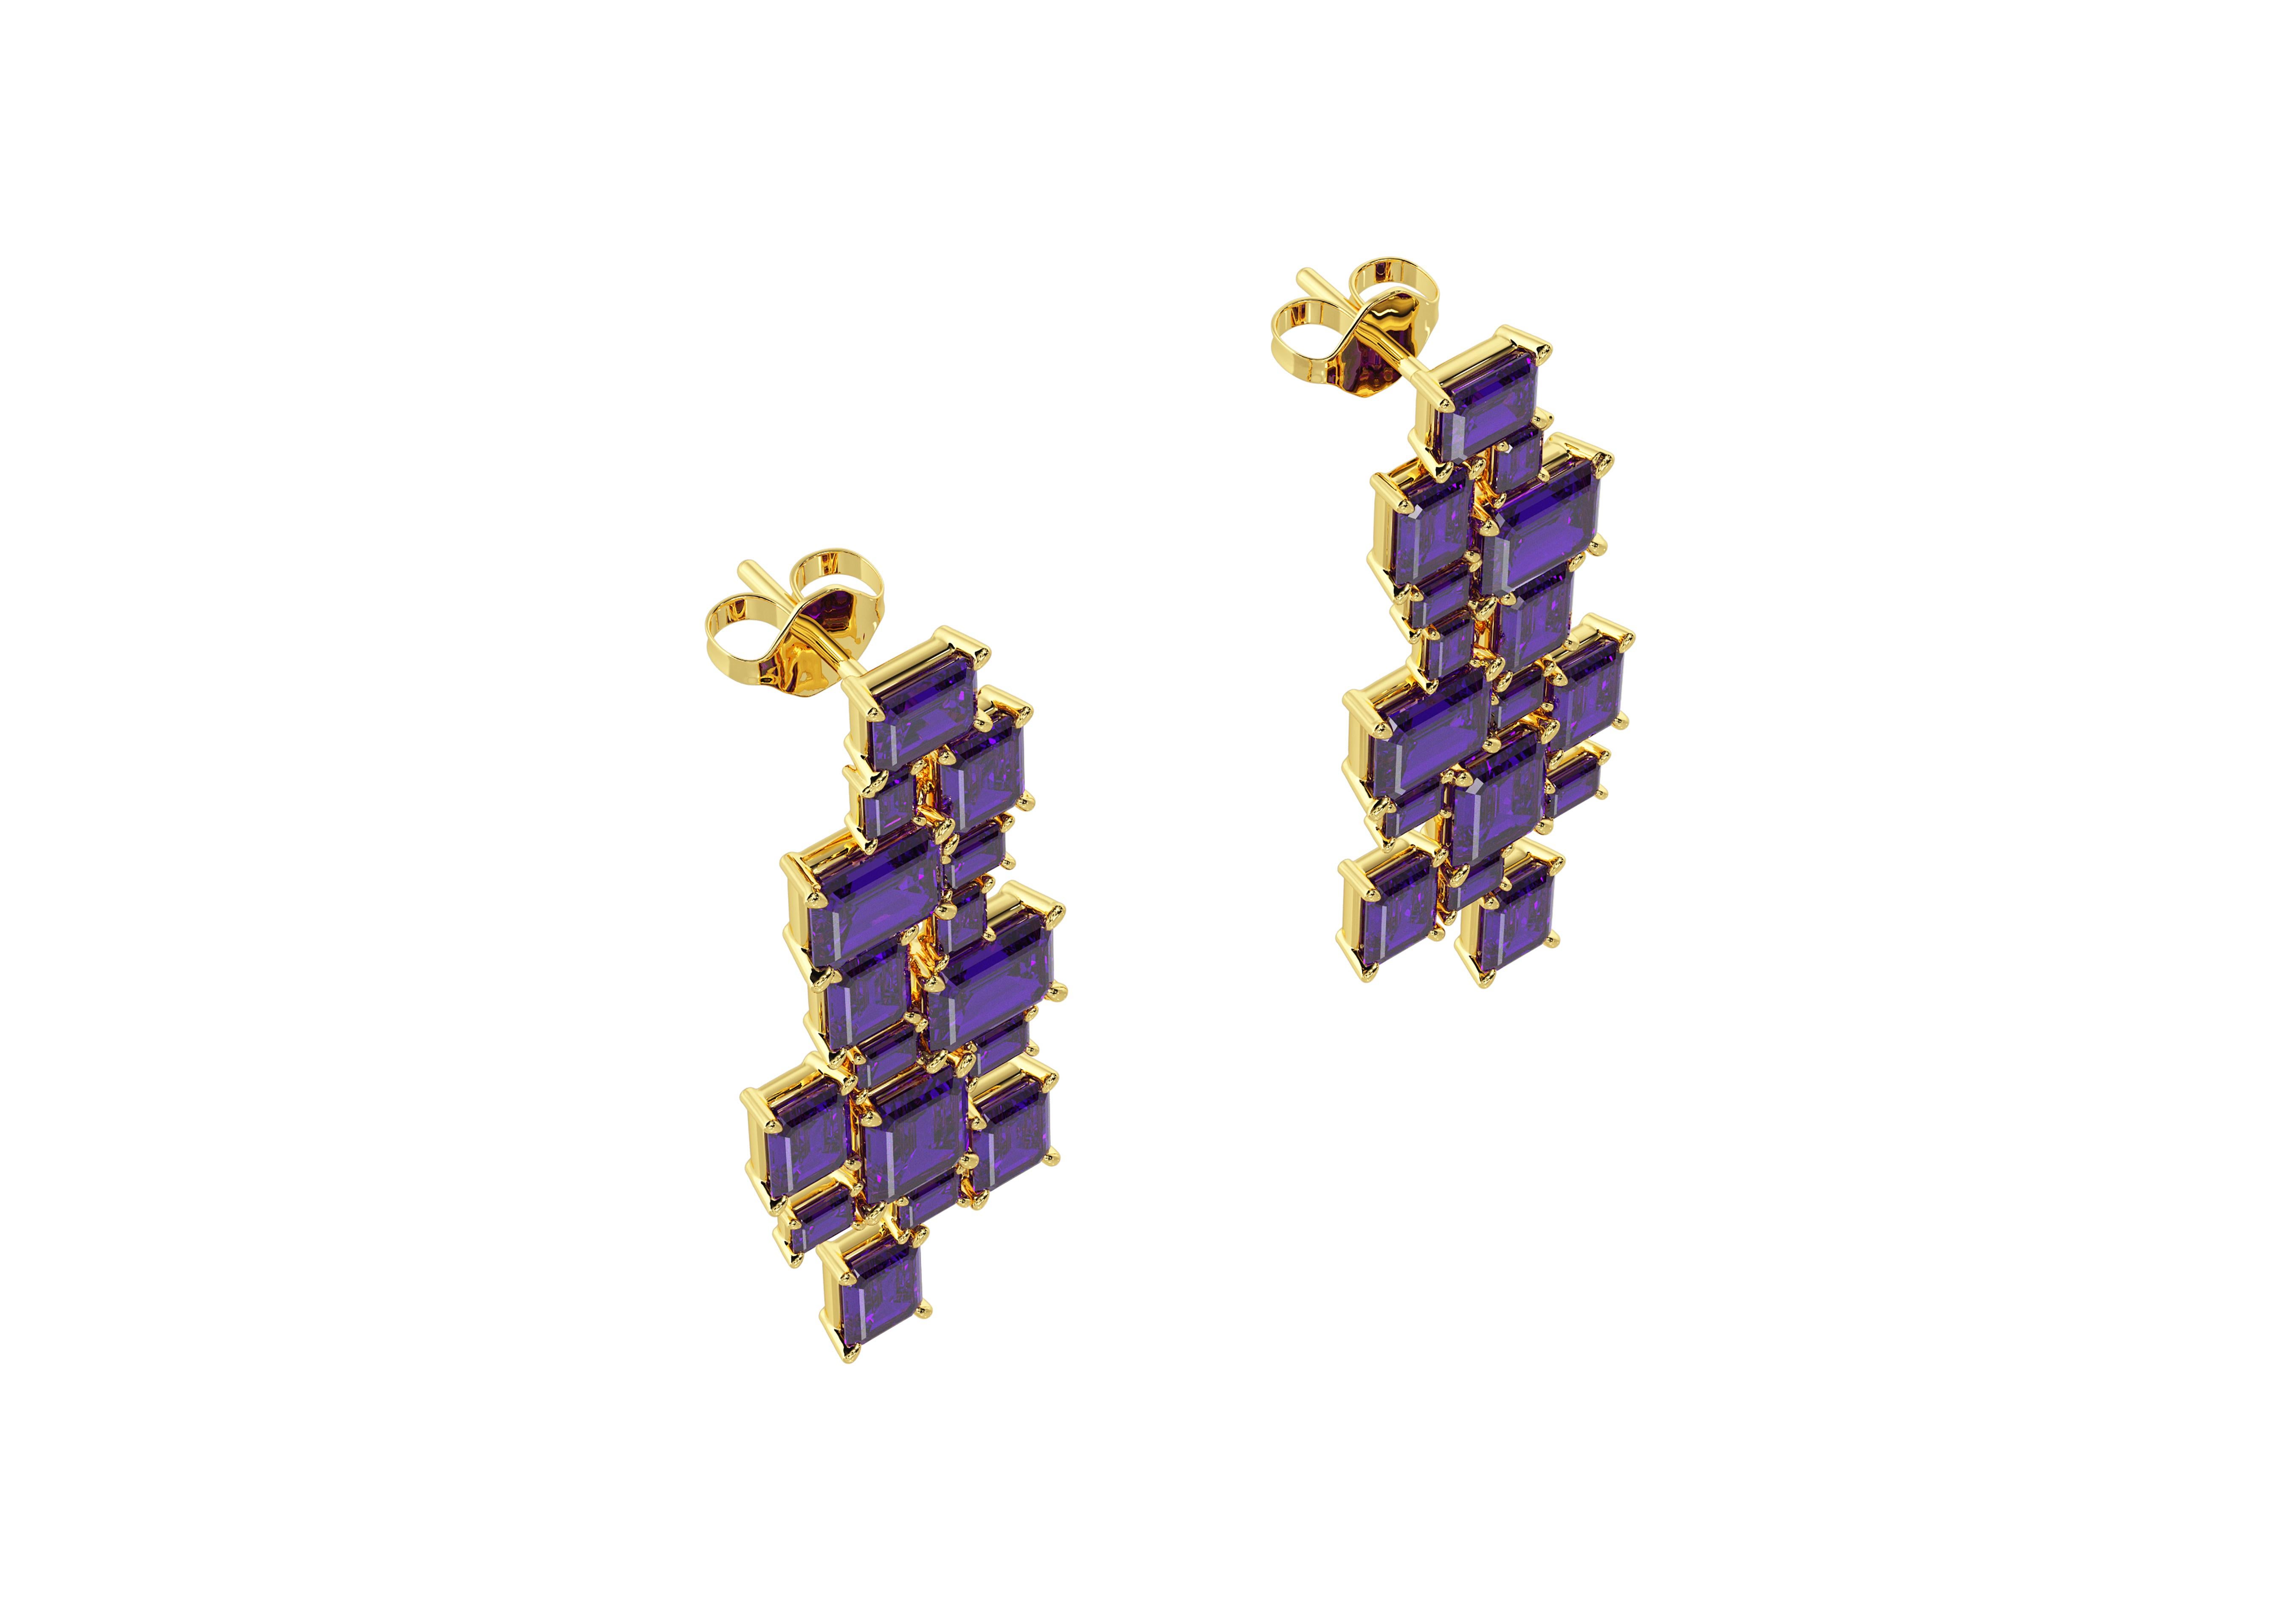 from FERRUCCI a contemporary design featuring emerald cut natural purple amethysts, selected and set in hand made, 18k yellow gold chandelier earrings, for a geometric waterfall of purple crystals, perfect for every season.

These spectacular